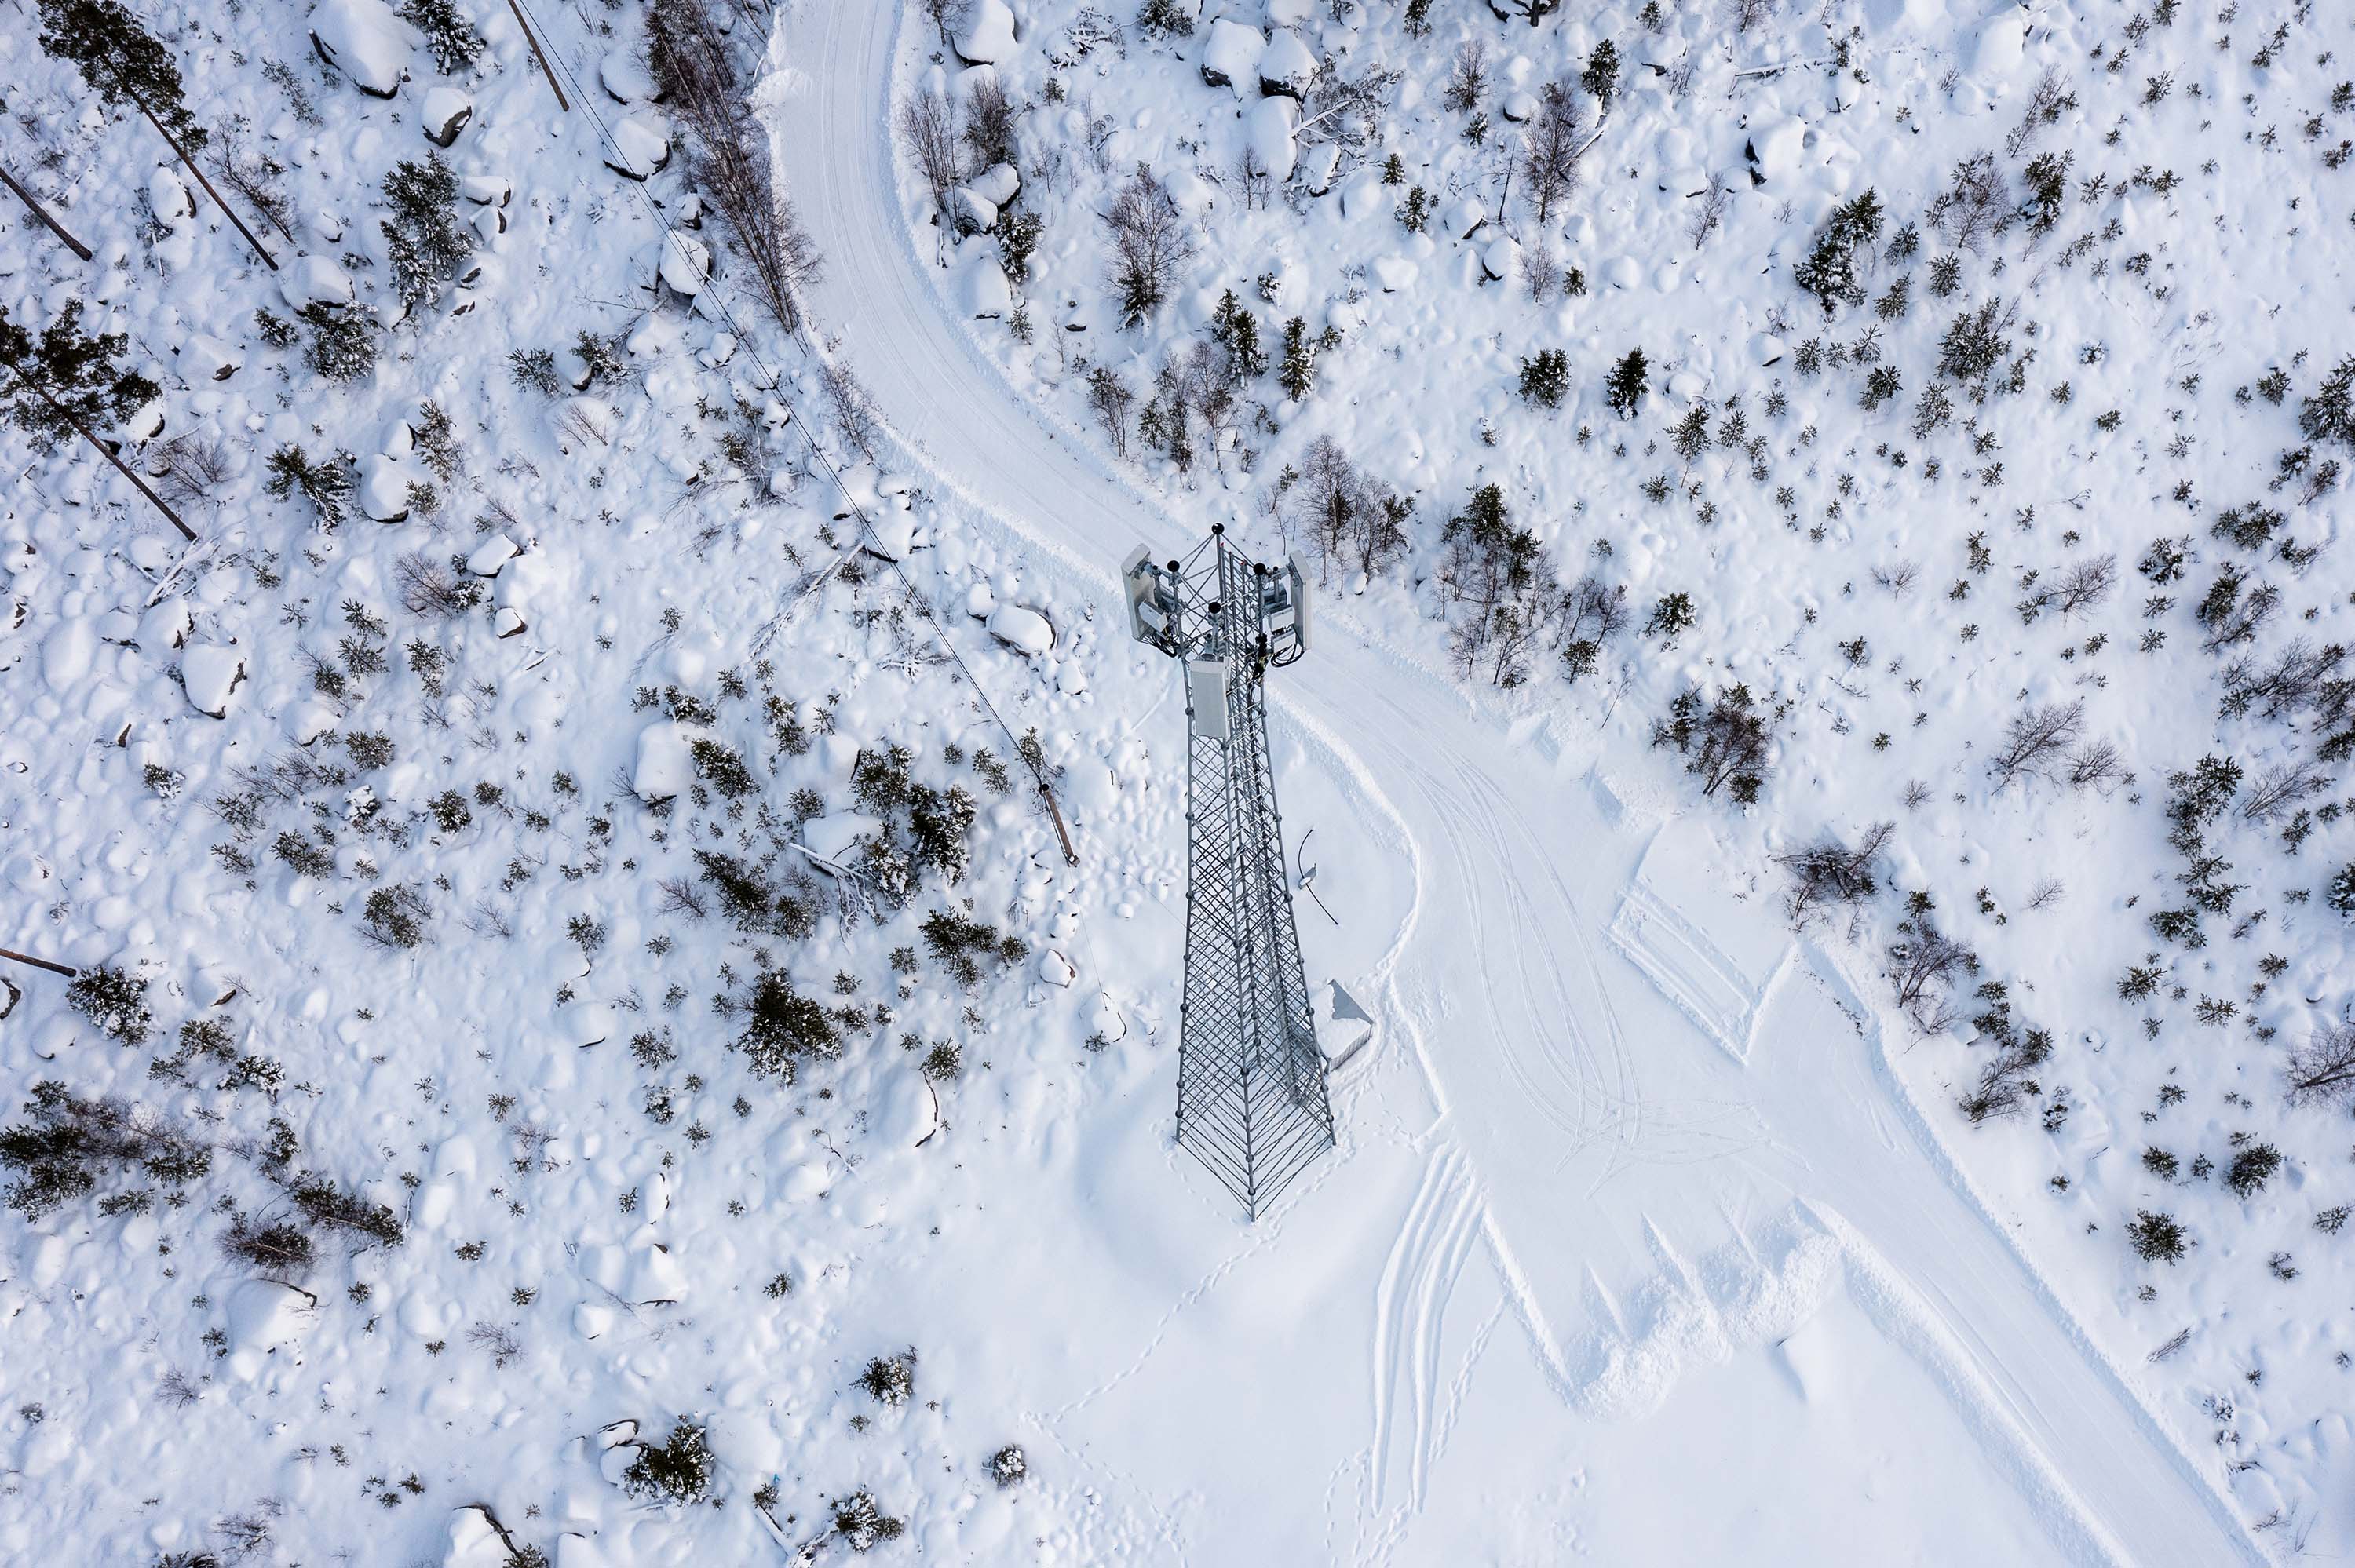 This is an aerial view of a snowy landscape with a metal 5G tower in the center. The ground is covered in snow, with a curved path on the left side.